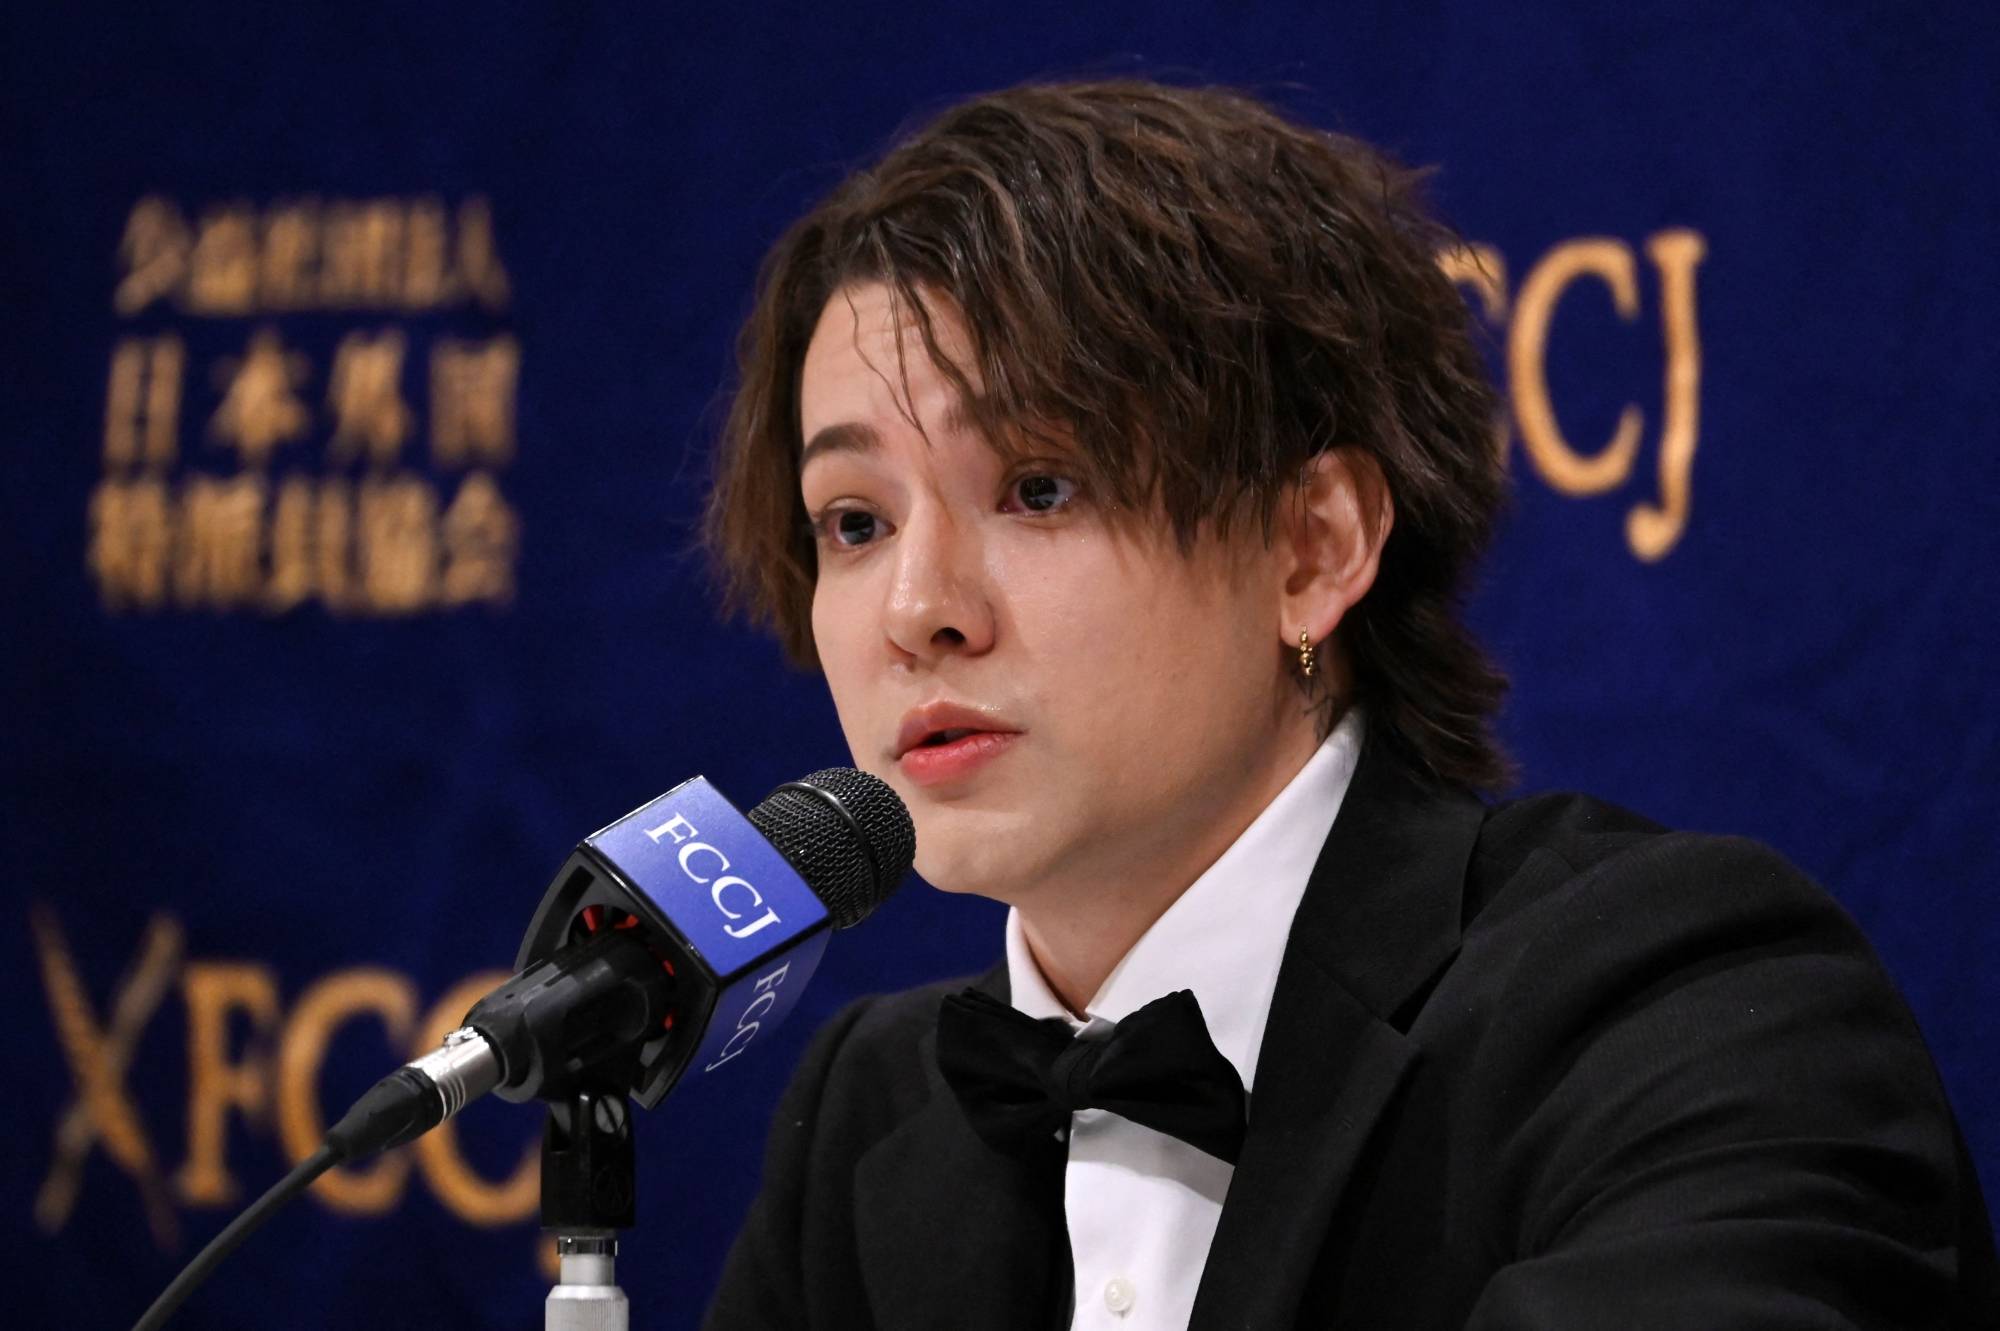 Japanese-Brazilian singer Kauan Okamoto, a former member of Japanese idol group Johnny's Junior, answers questions during a news conference at the Foreign Correspondents' Club of Japan in Tokyo on Wednesday. | AFP-JIJI